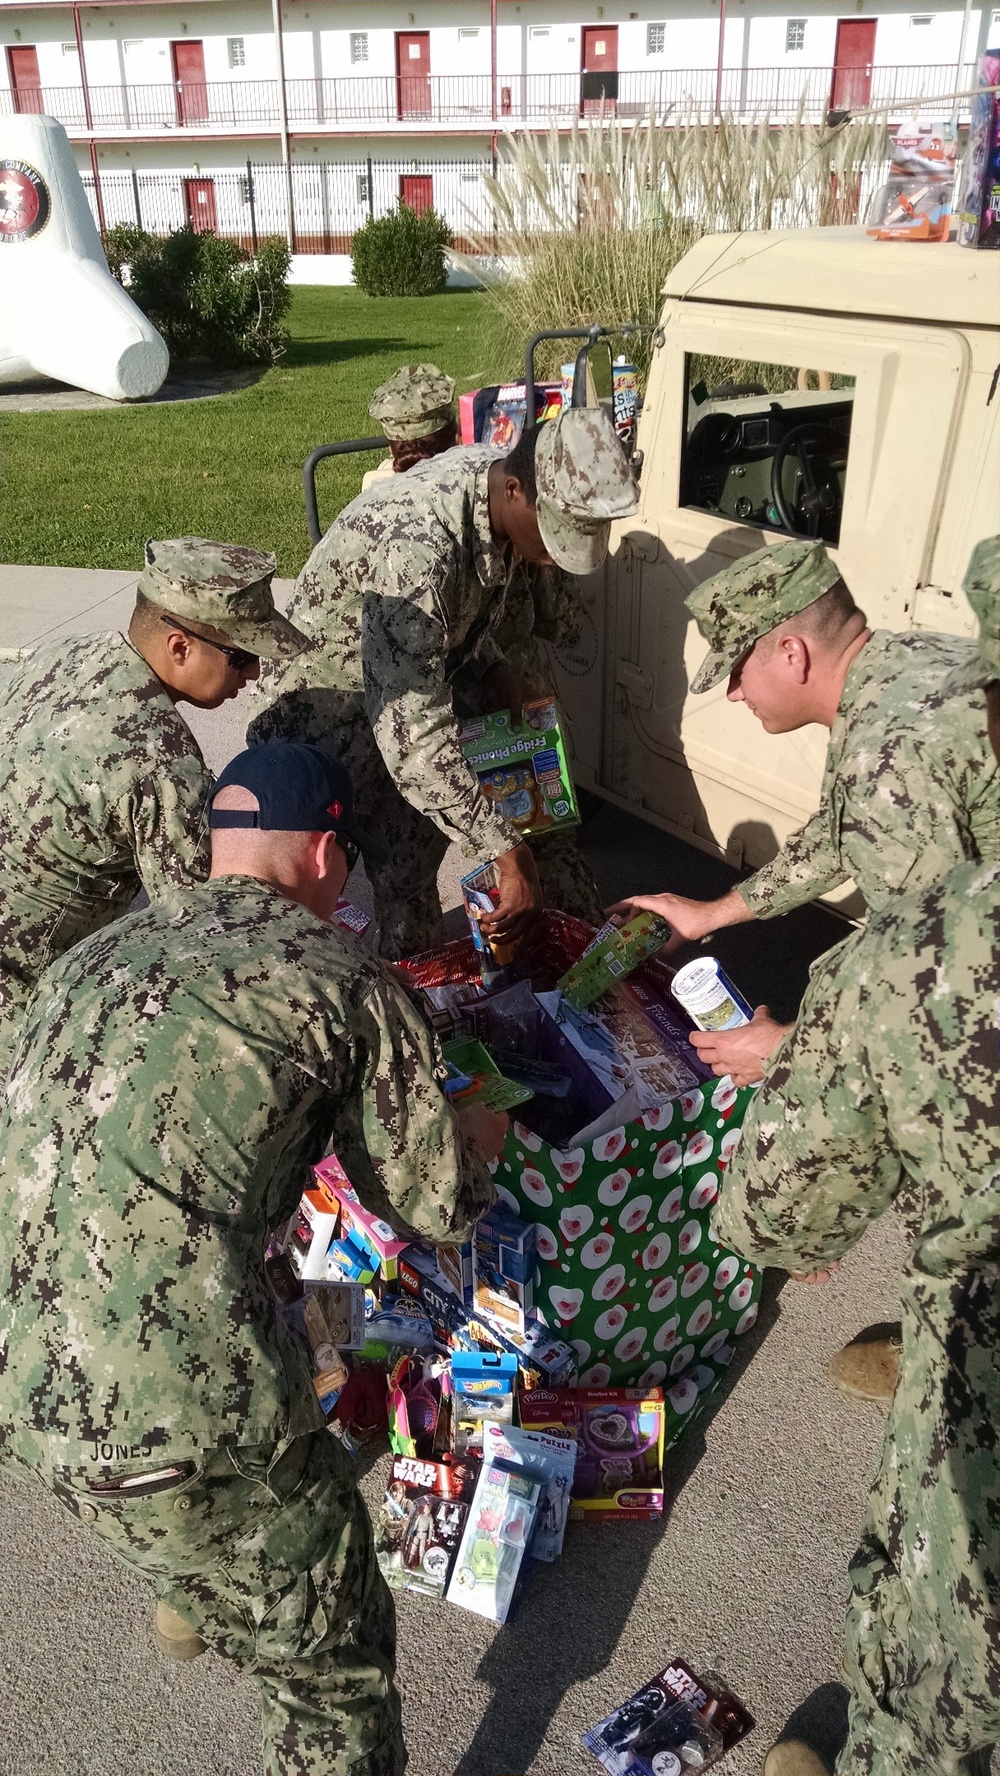 Seabees Toys for Tots Fundraiser